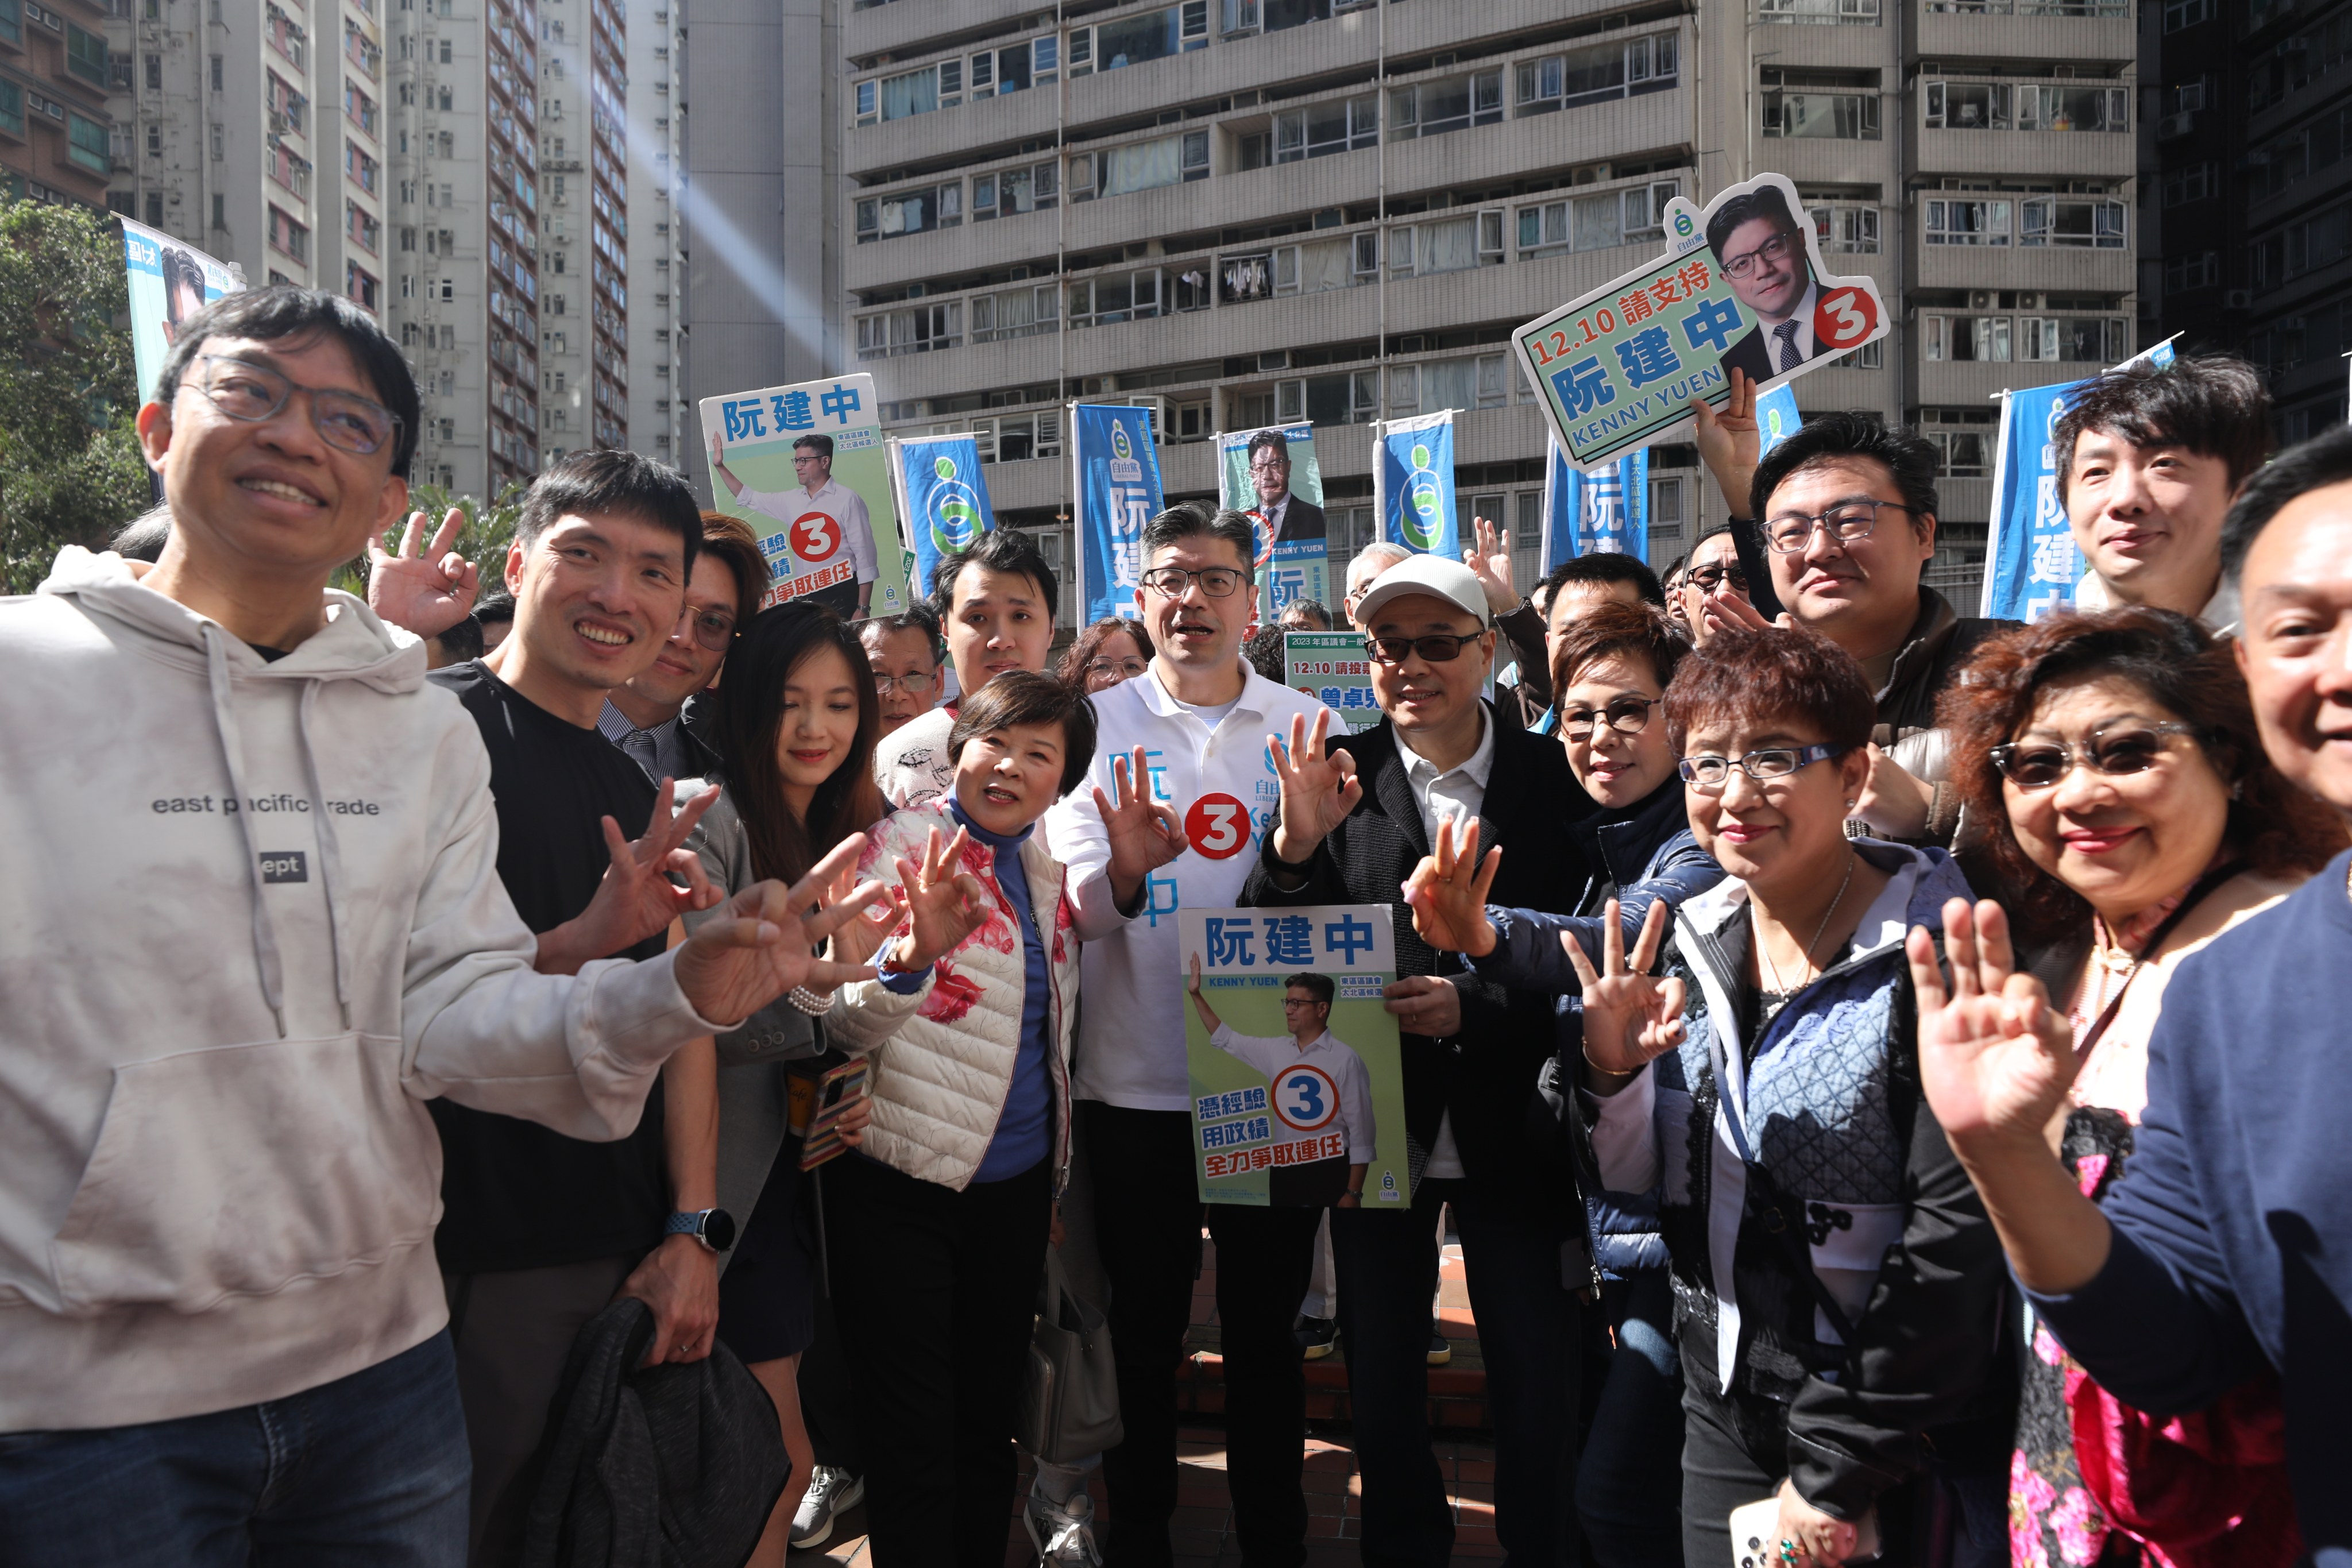 A Liberal Party election candidate hits the streets of North Point with supporters on Saturday. Photo: Xiaomei Chen